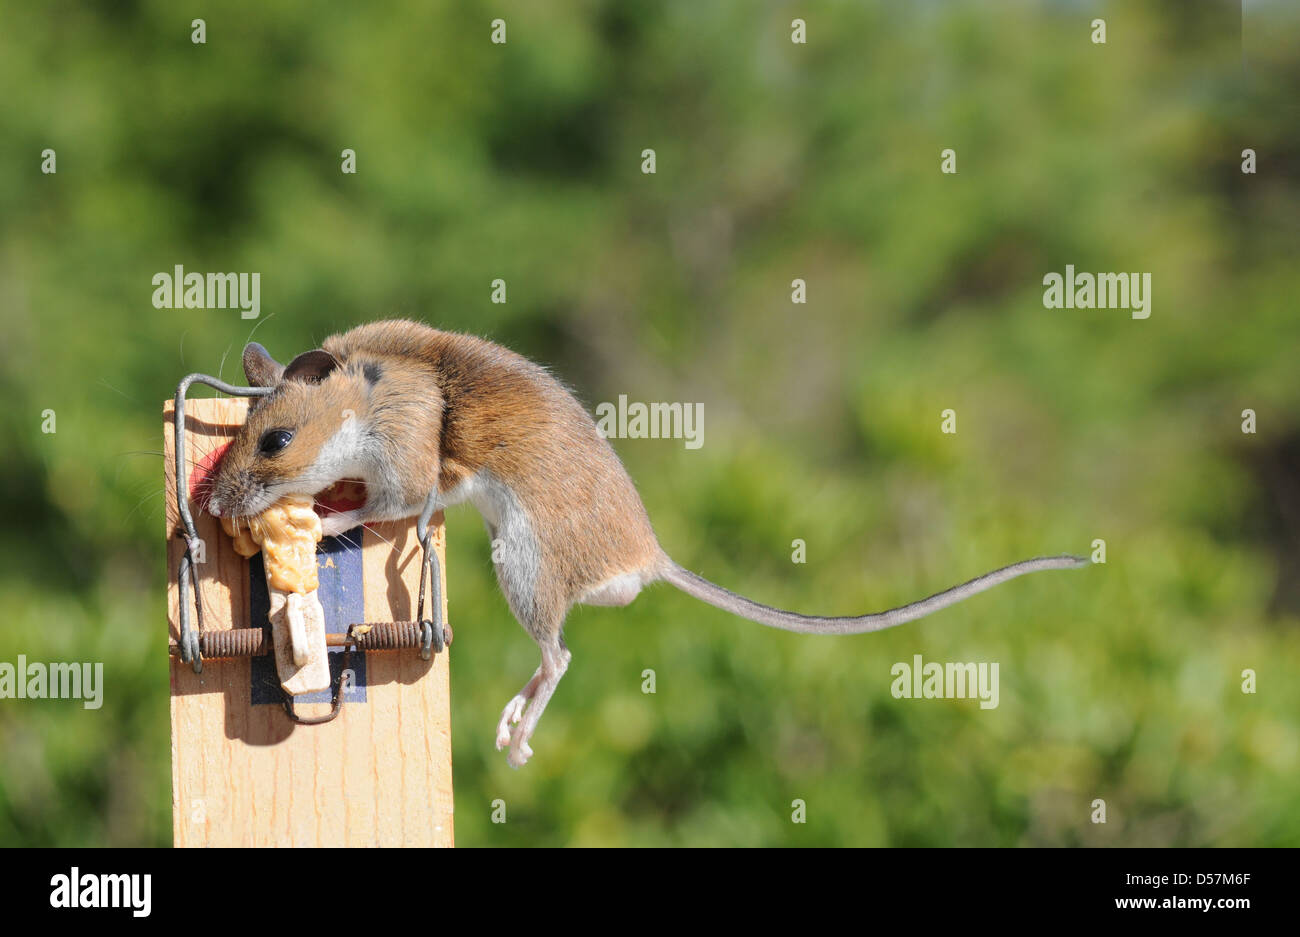 Green Humane Mousetrap Captured Field Mouse Stock Photo by ©steveheap  624280852